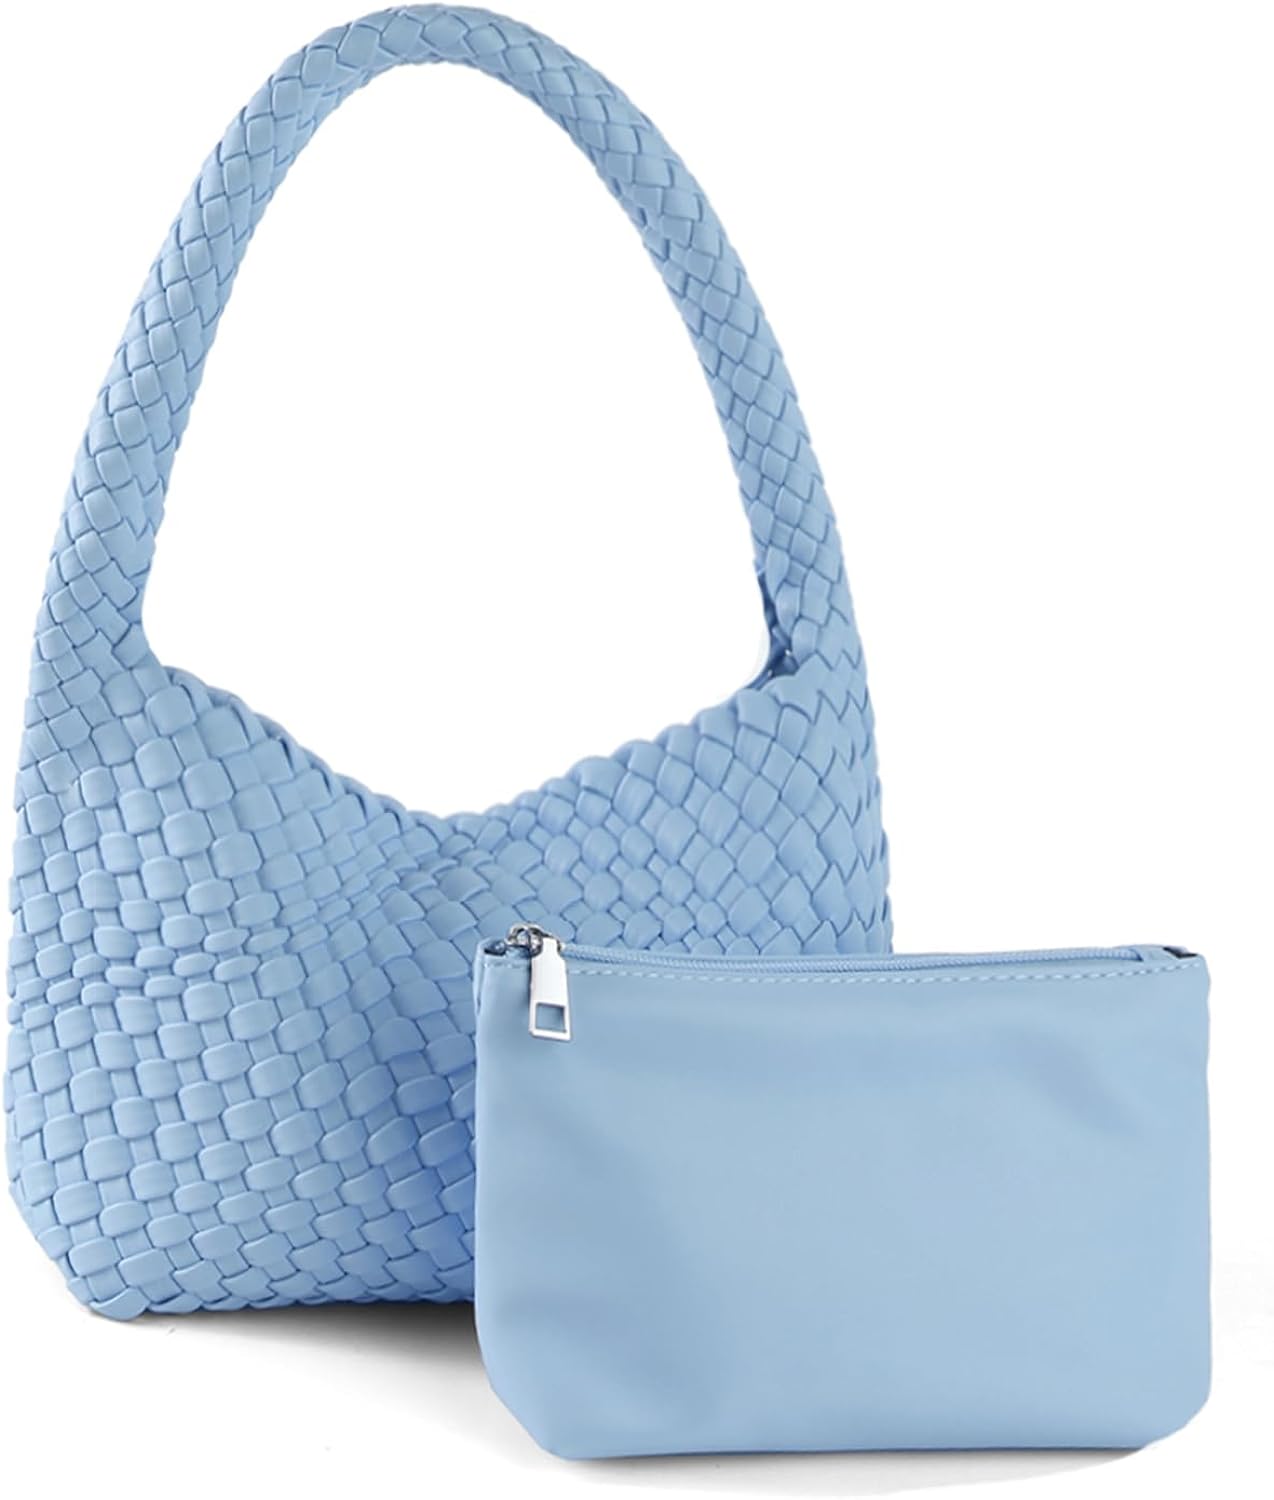 Soledad | Soft Woven Leather Tote - Light Blue / Small - AMVIM